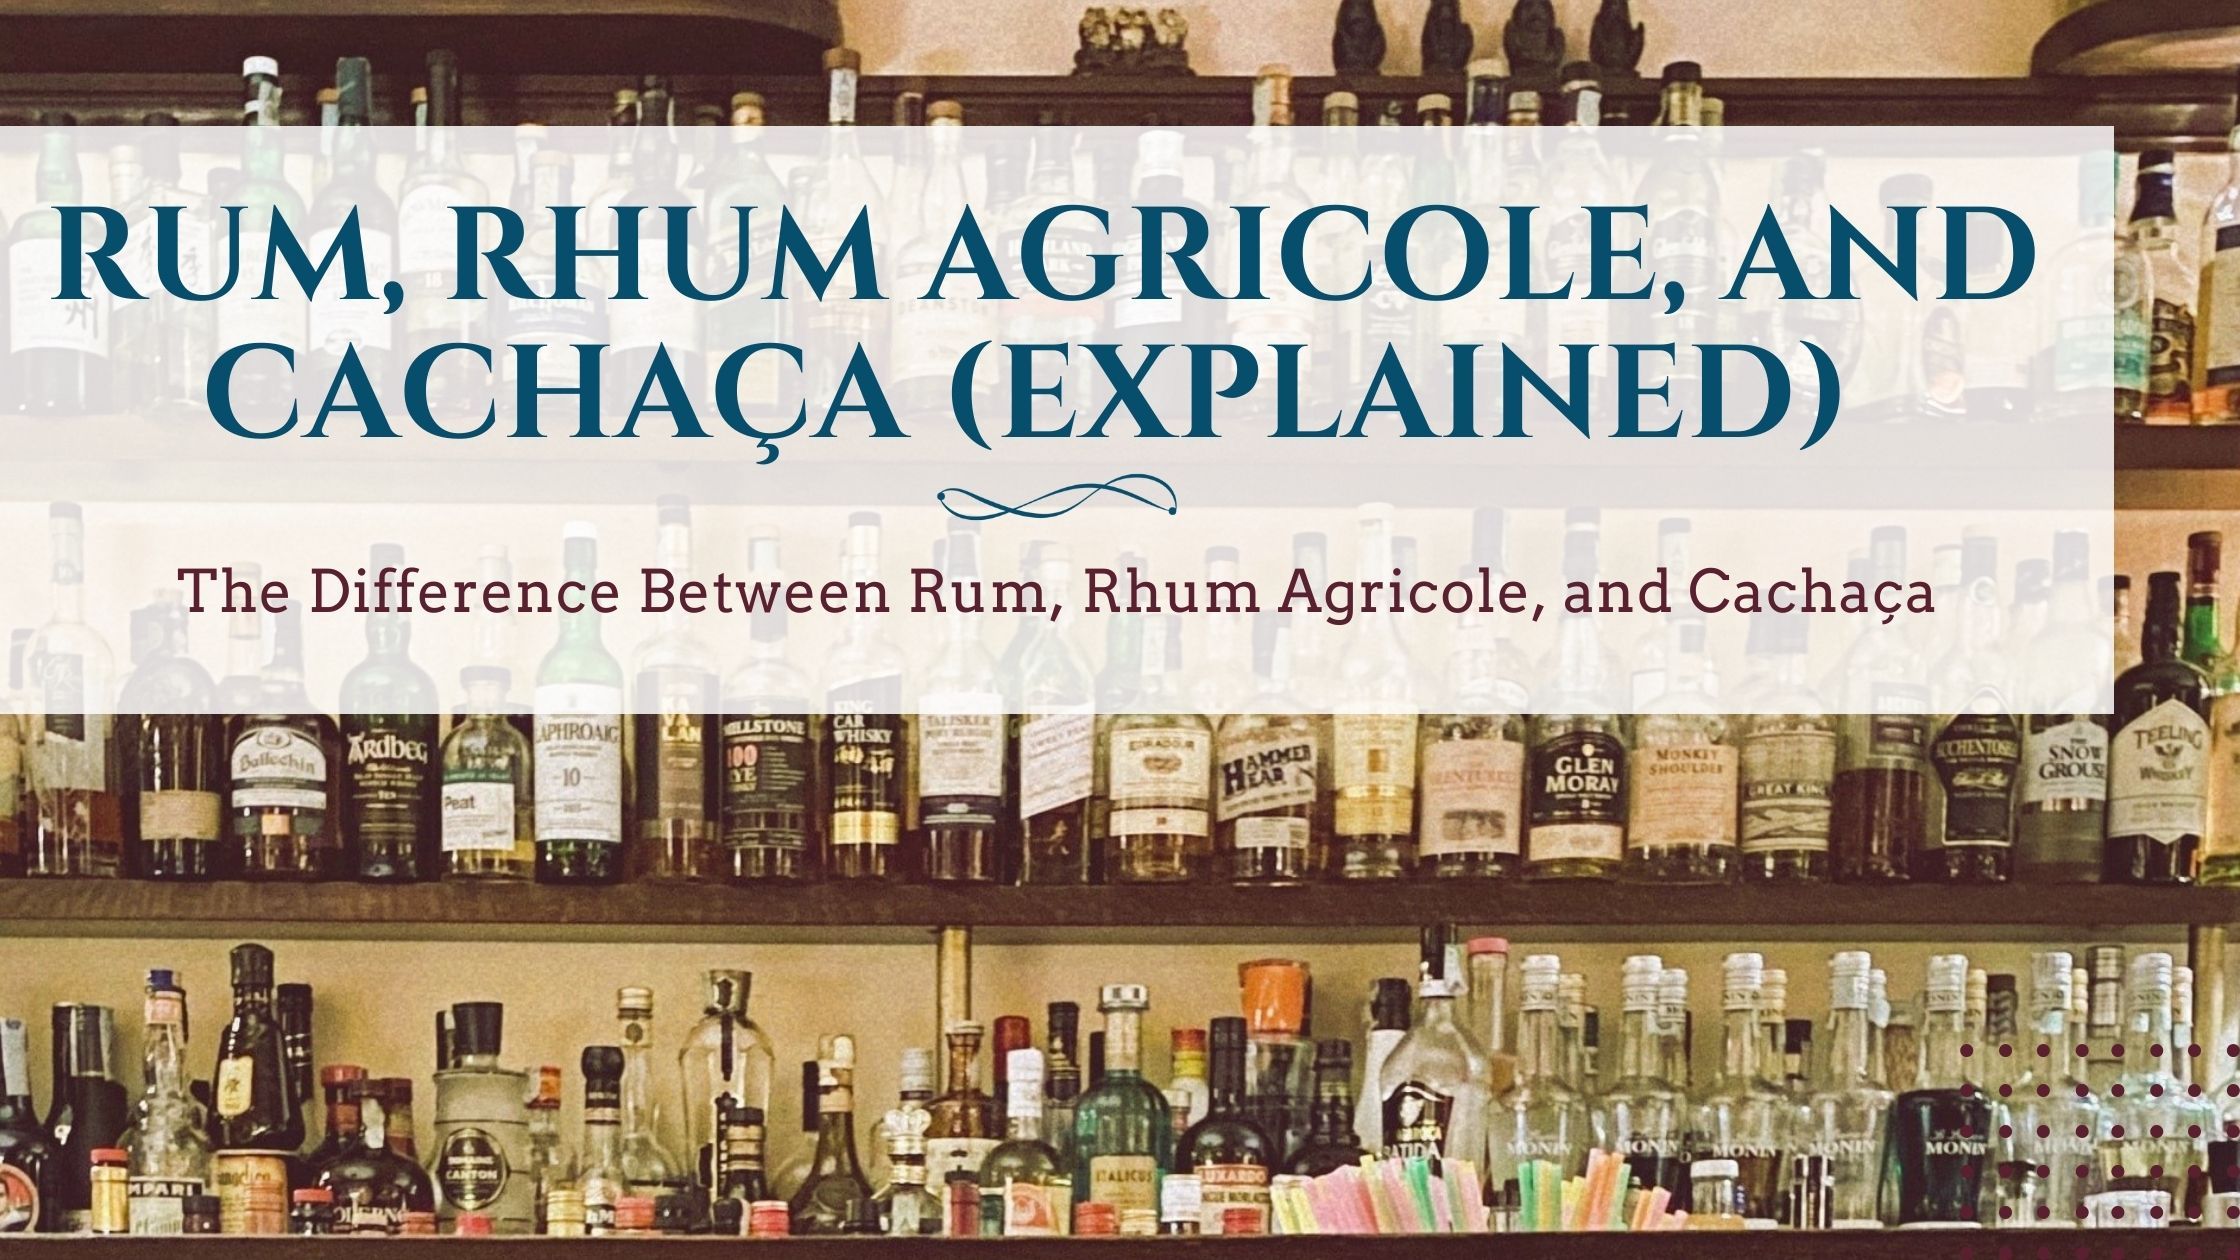 Image of diy distilling the differenece between rum rhum agricole and cachaca